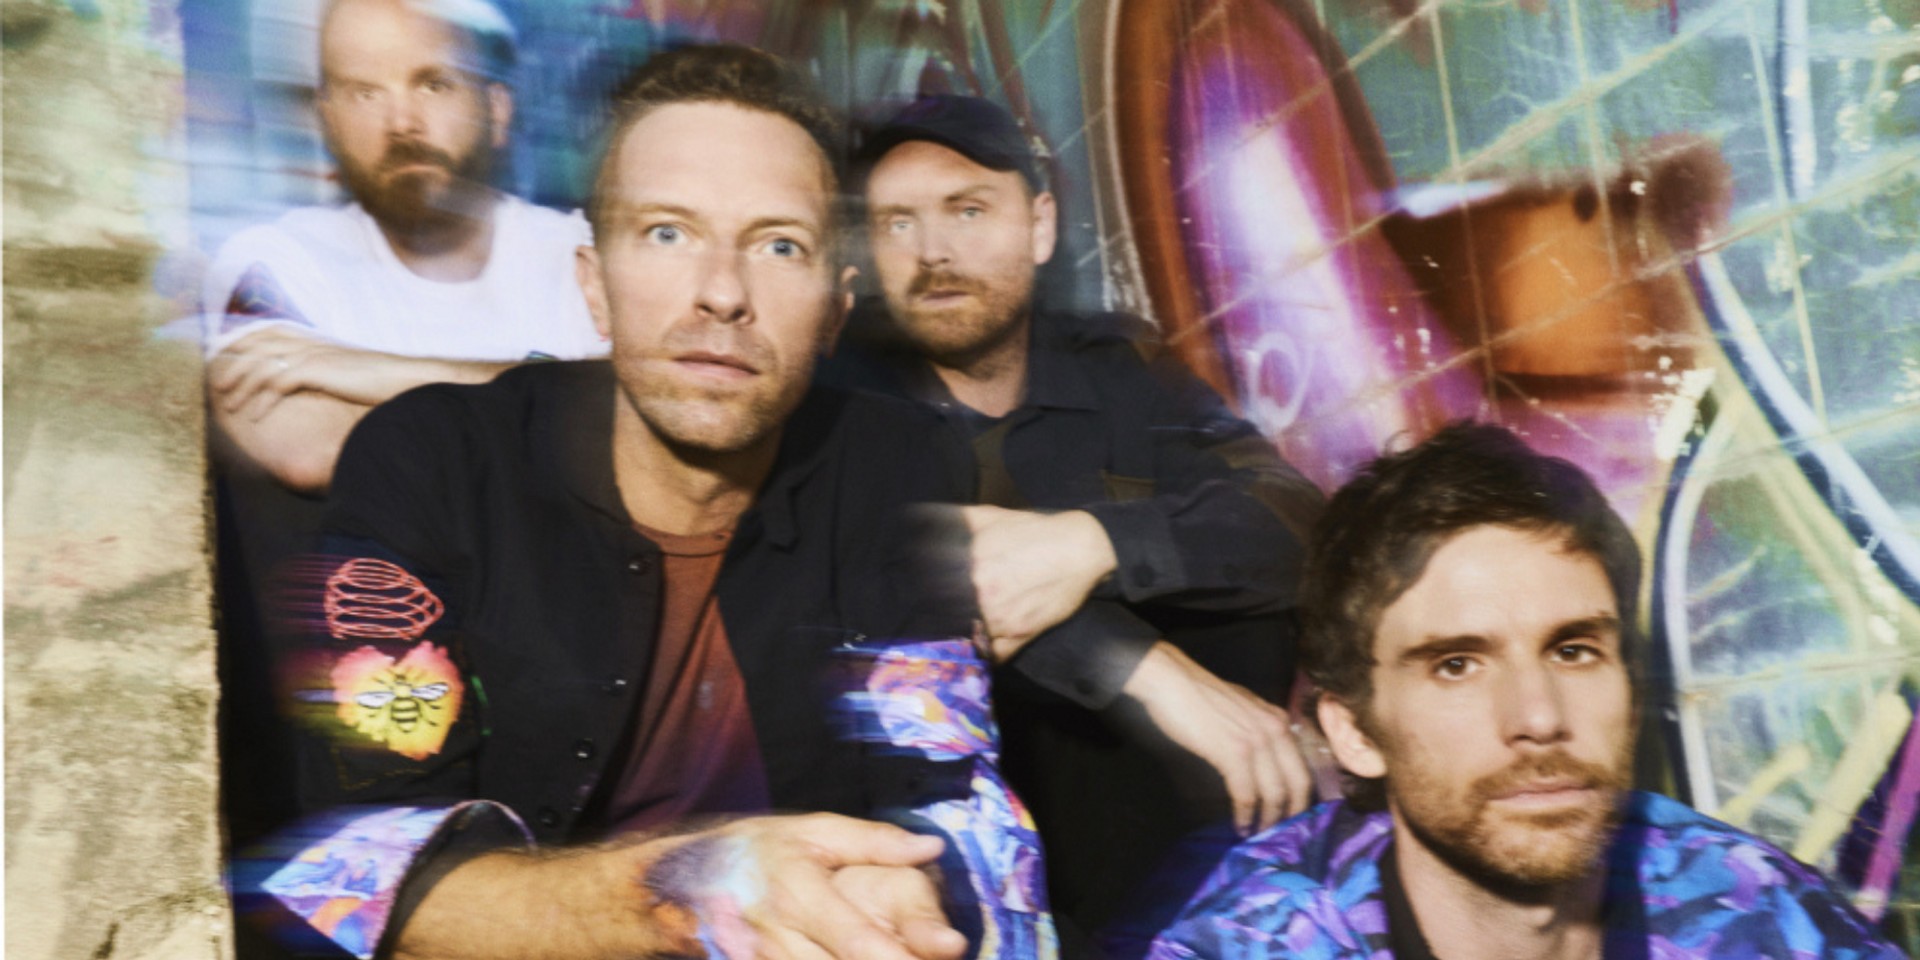 Coldplay preview upcoming Max Martin-produced album 'Music of the Spheres' with new single, 'Coloratura' – watch